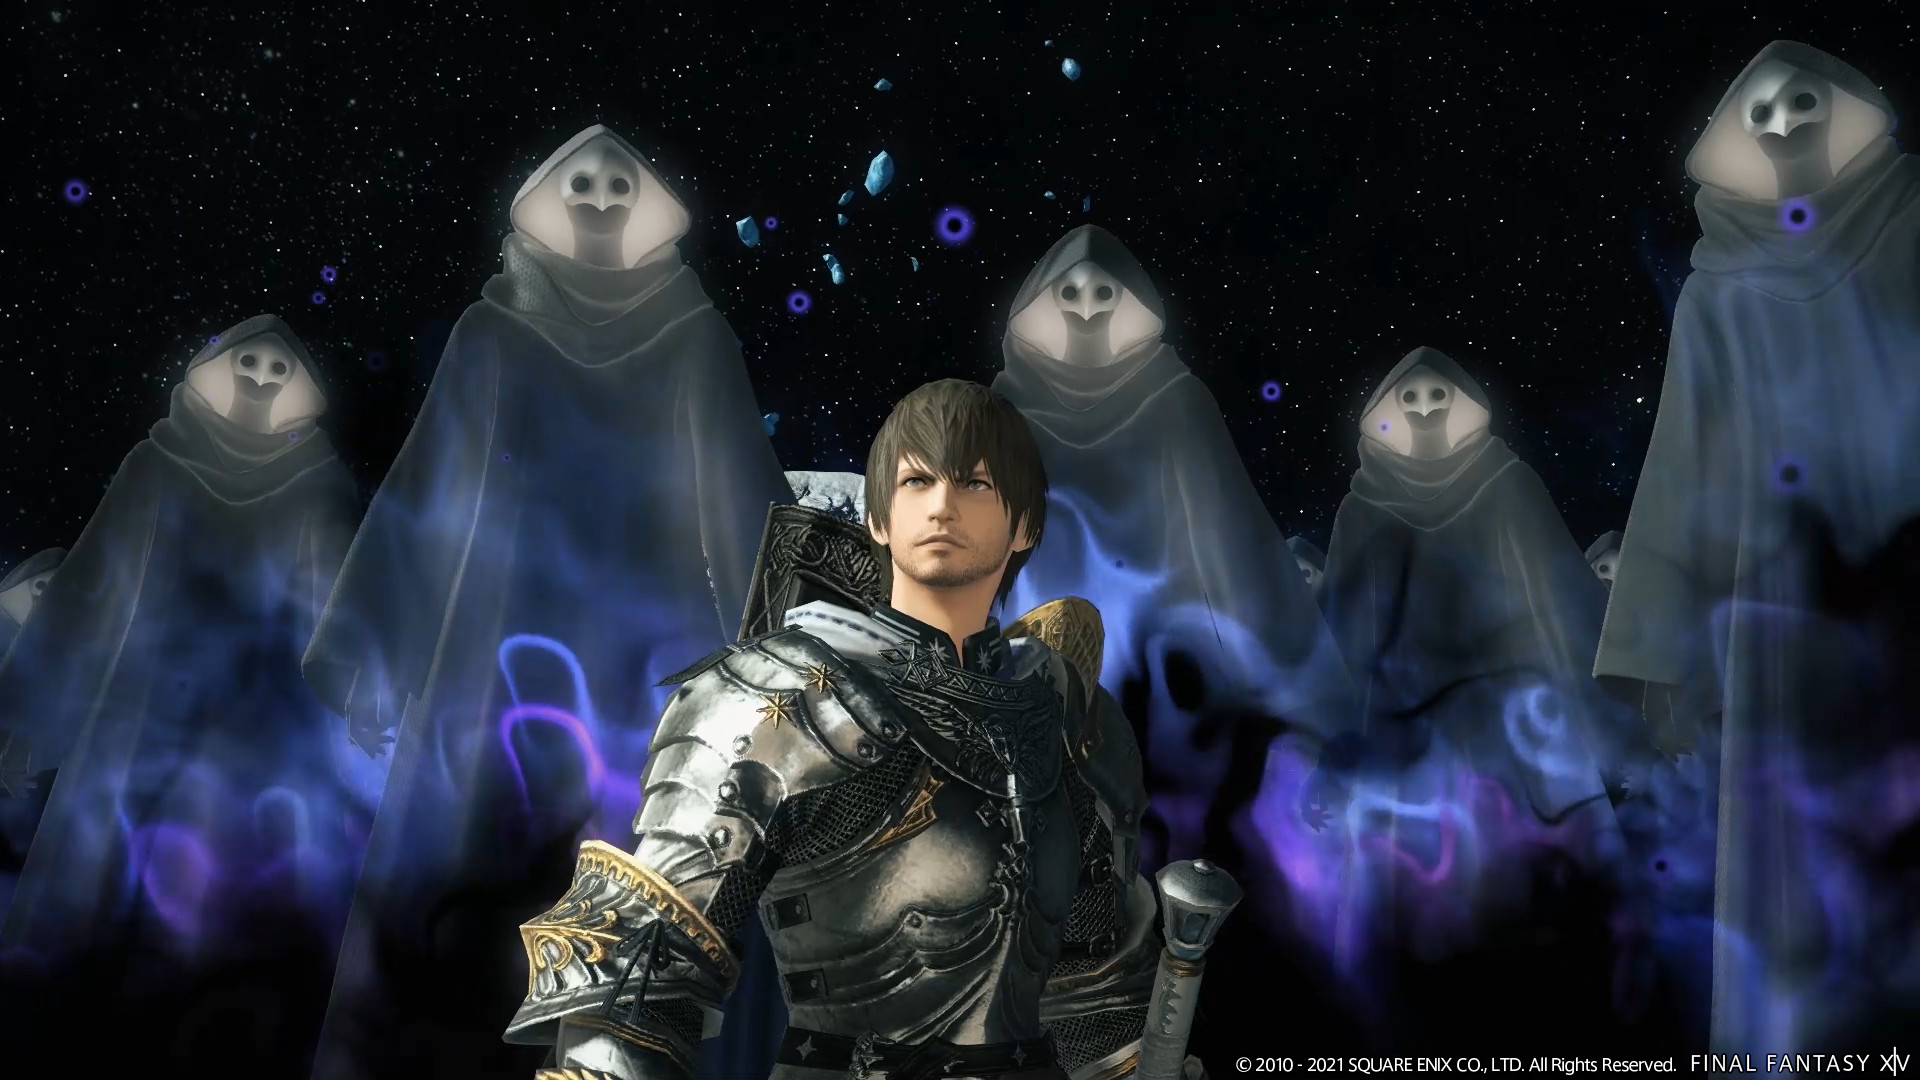 Final Fantasy XIV Endwalker screenshot of an armored man with dark hair standing in front of a dark background with hooded figures behind him